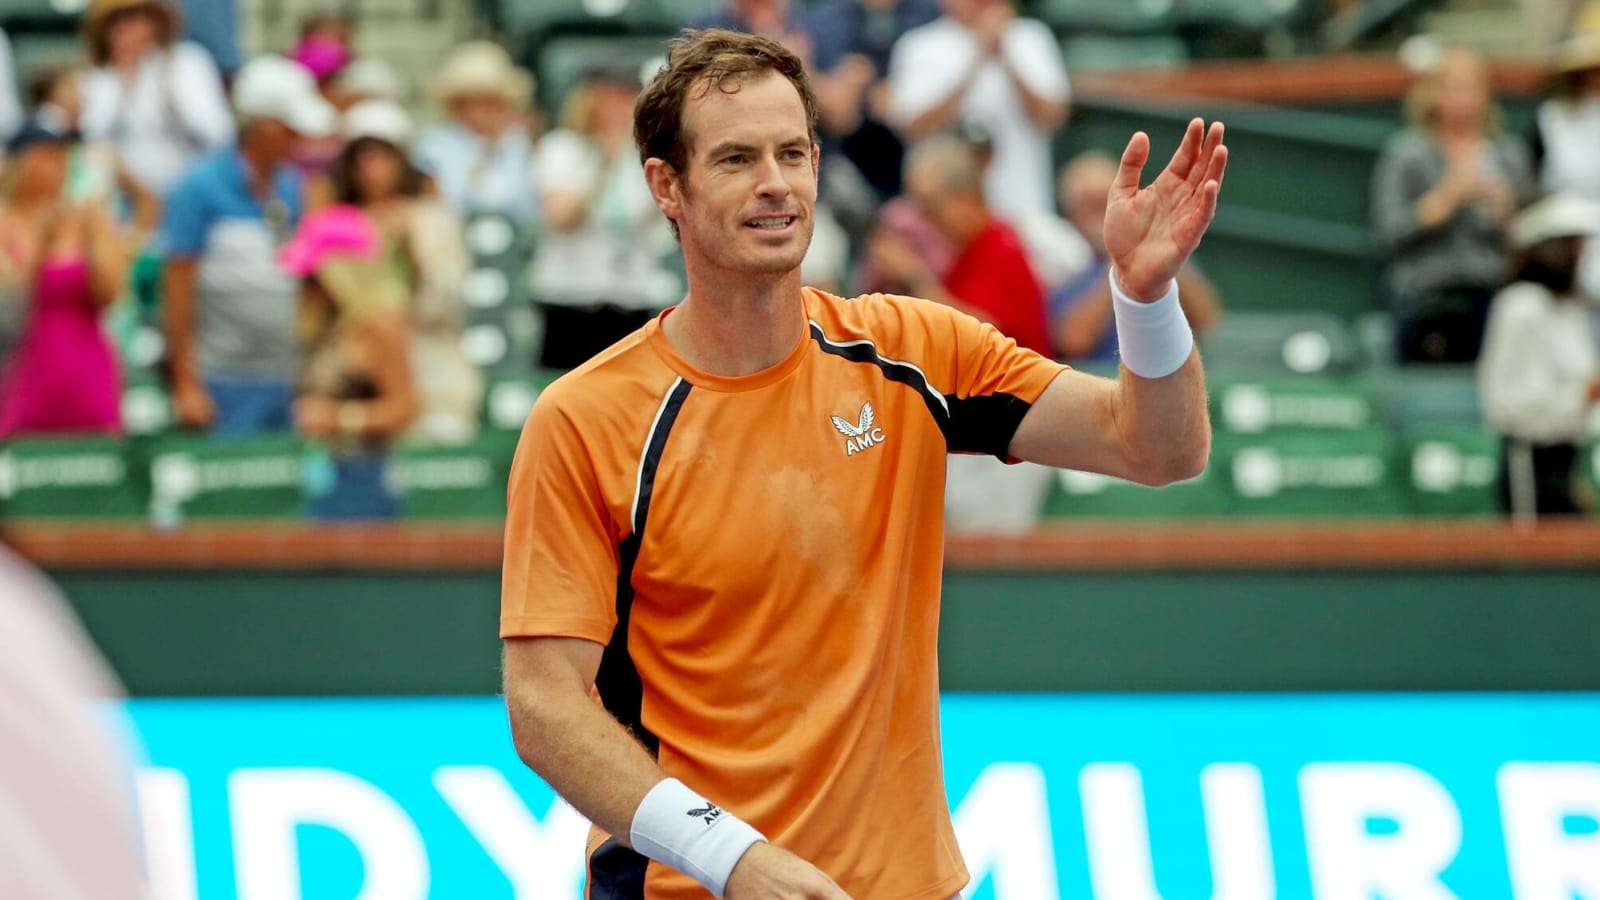 'The locker is a scary place,' Standing on the brink of retirement Andy Murray reveals how meeting his ‘idols’ was a trip downhill for the young Briton